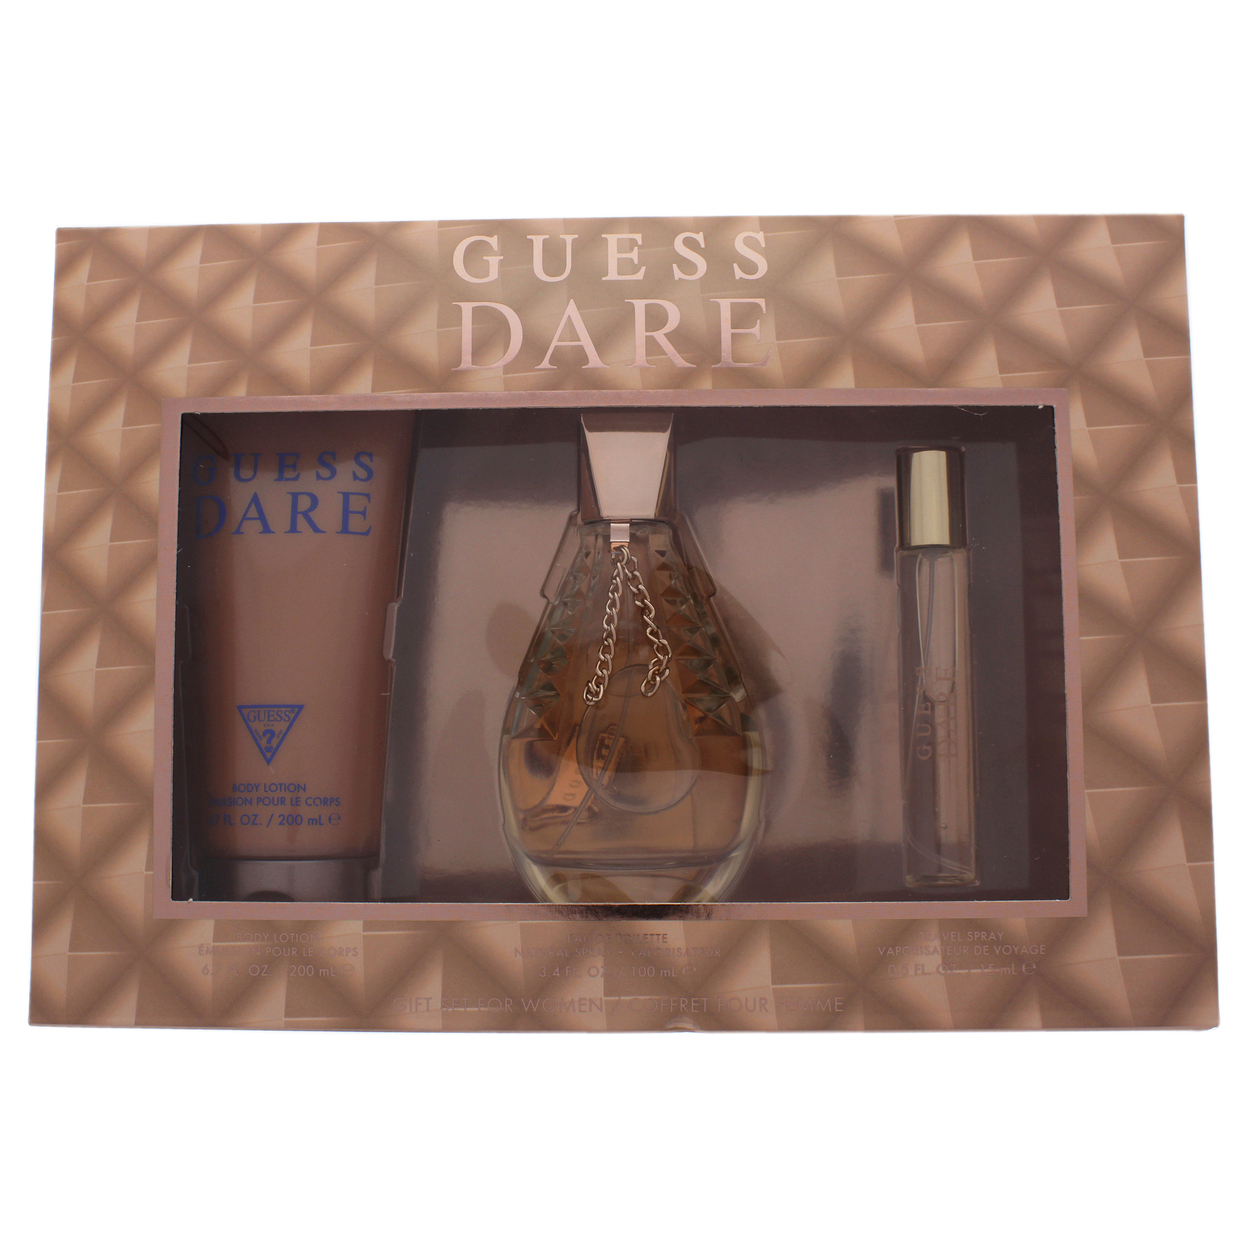 Guess Dare 3 Pc Gift Set 3 Pc Gift Set